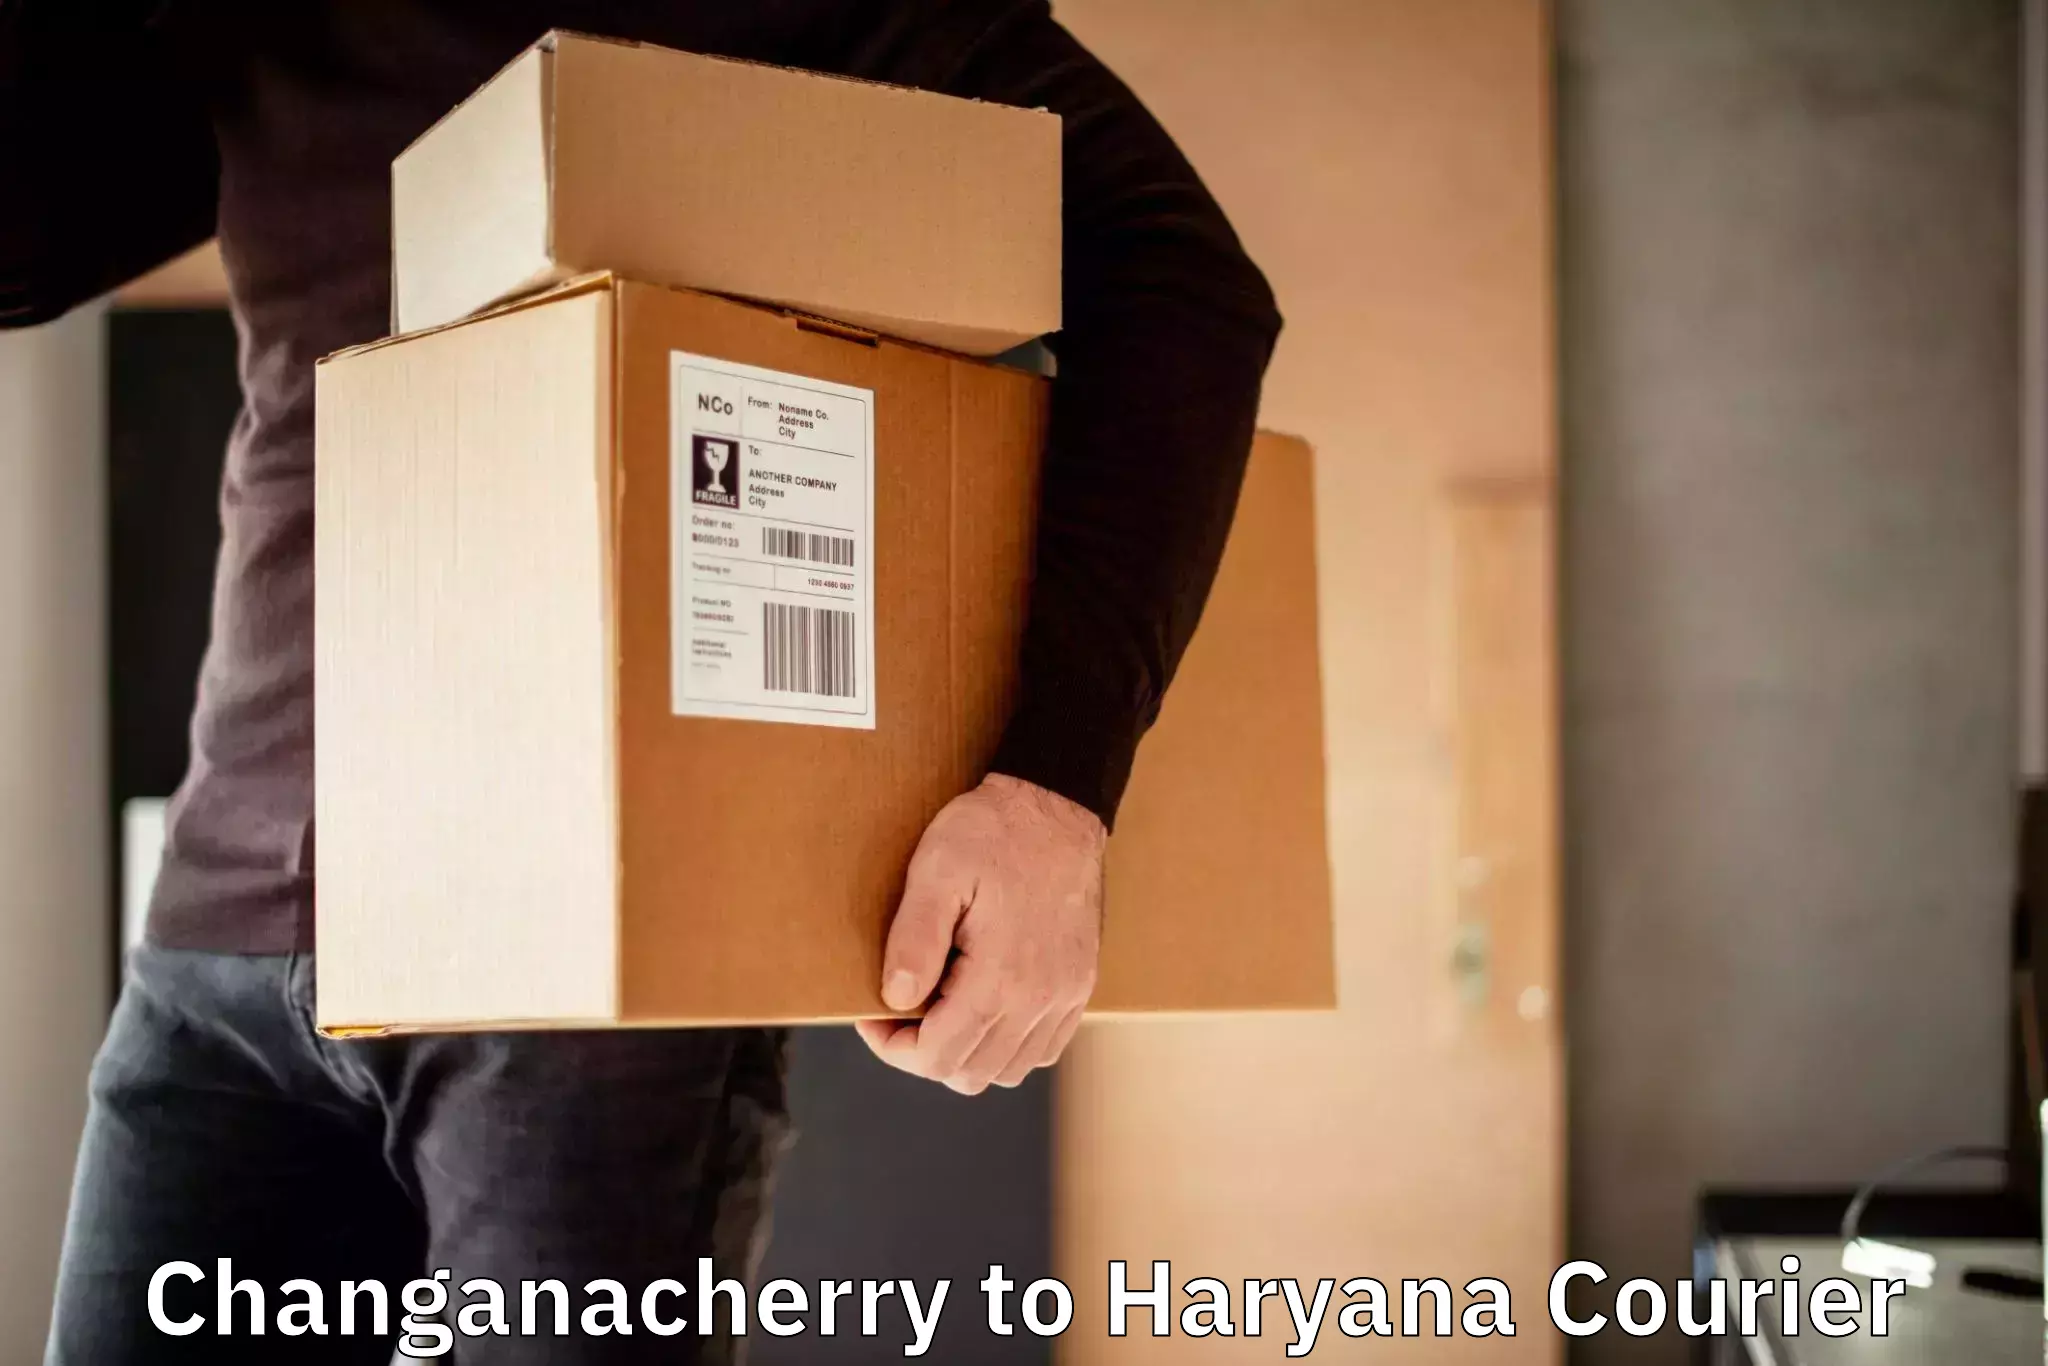 Large package courier Changanacherry to Chaudhary Charan Singh Haryana Agricultural University Hisar